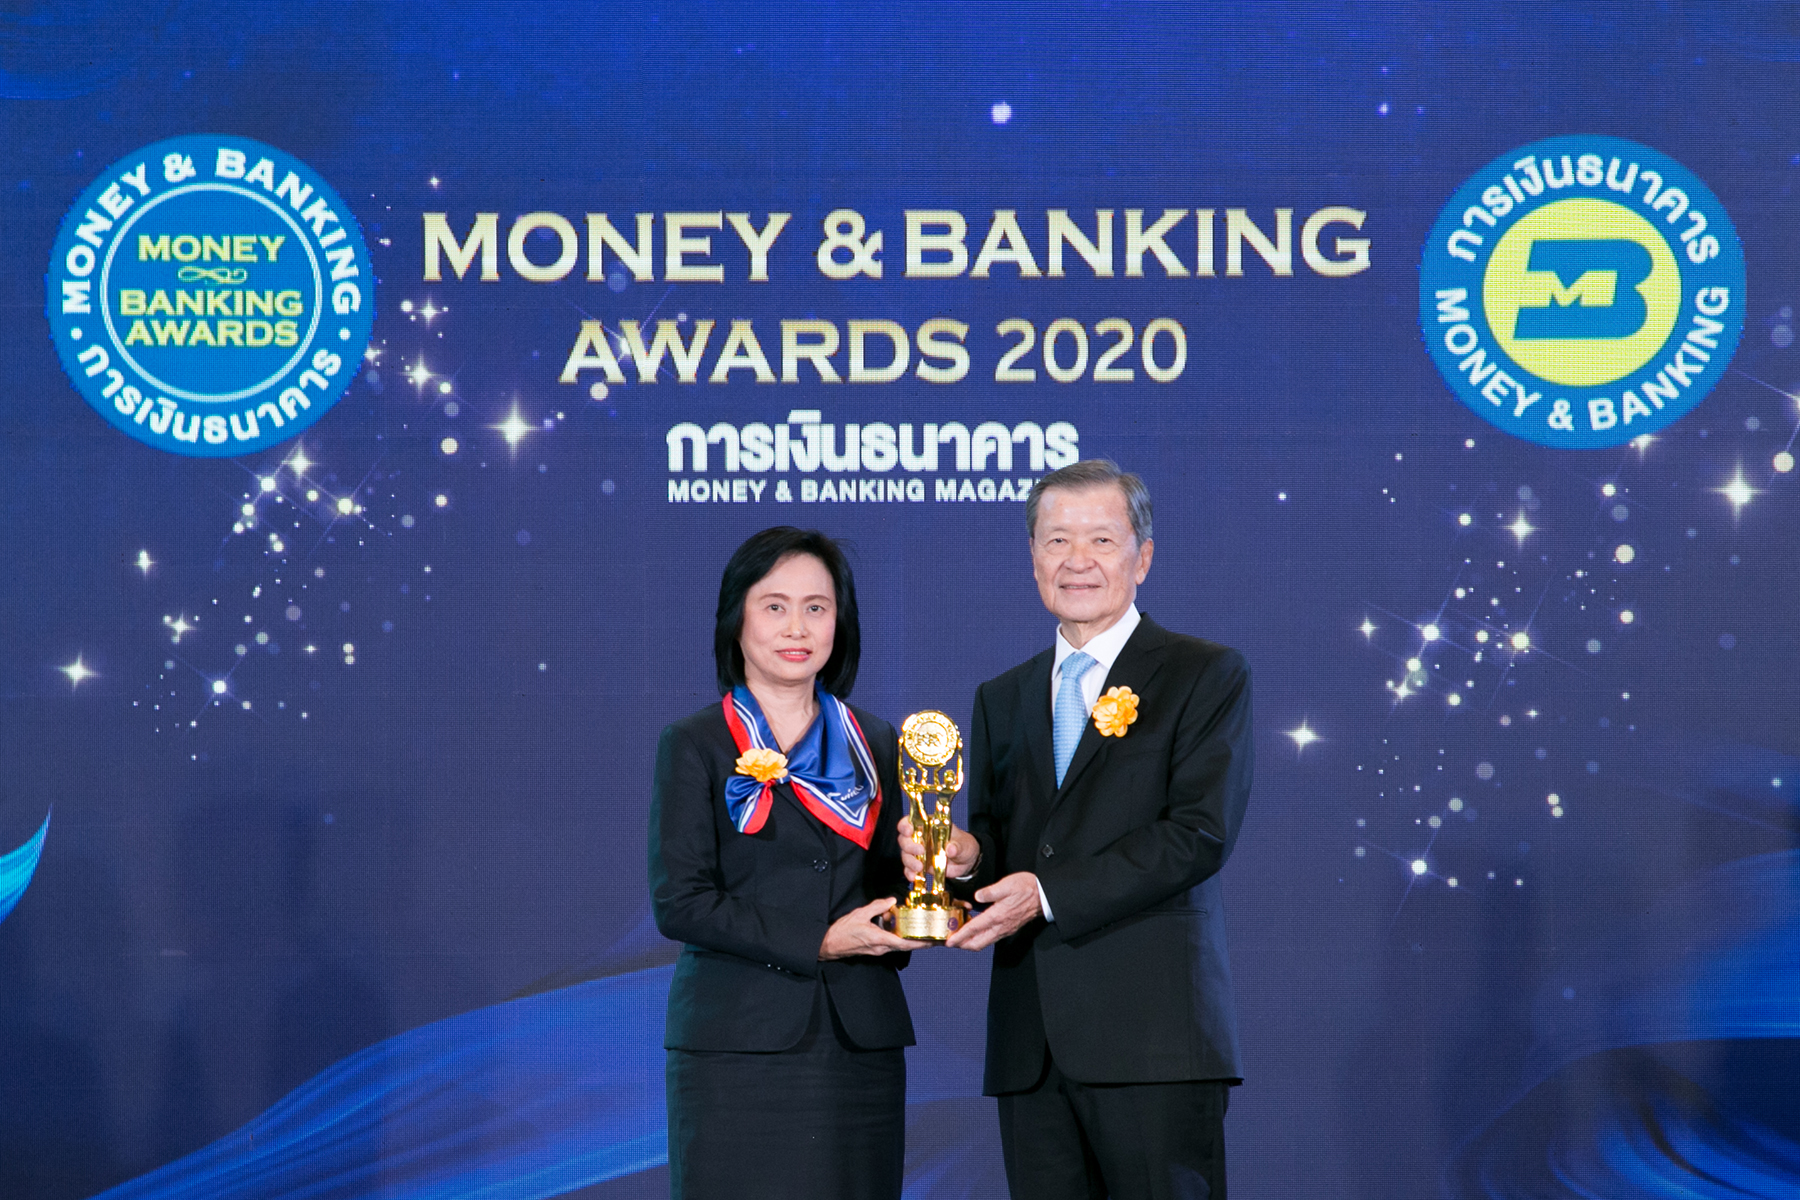 EXIM Thailand Received the “Best Design Excellence Award” at Money Expo 2020